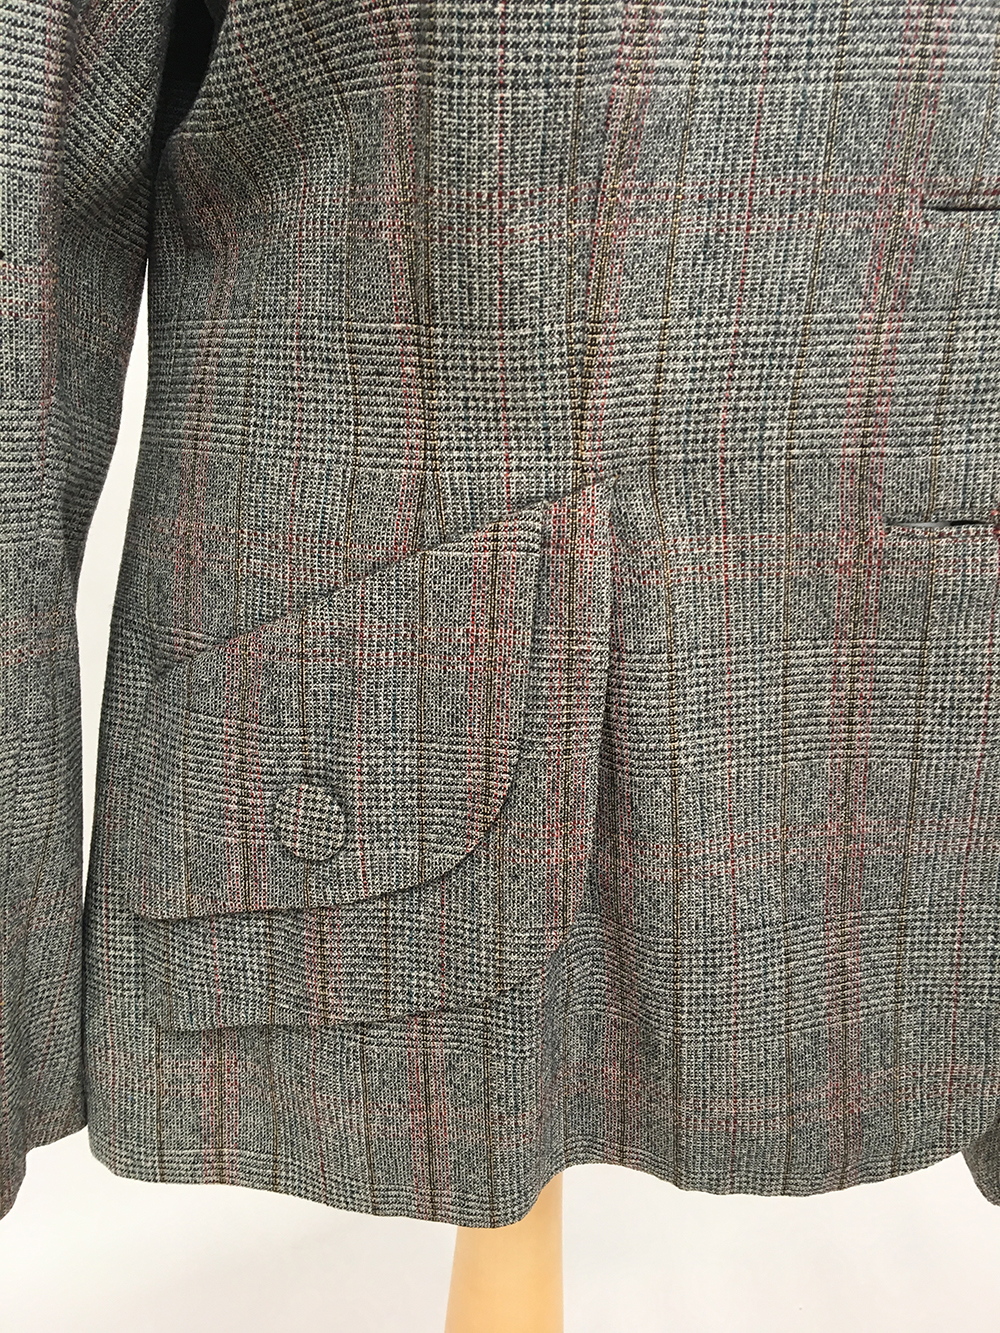 Rare 1940s wool check jacket tailored in Japan, self covered buttons and false pockets with double - Image 4 of 4